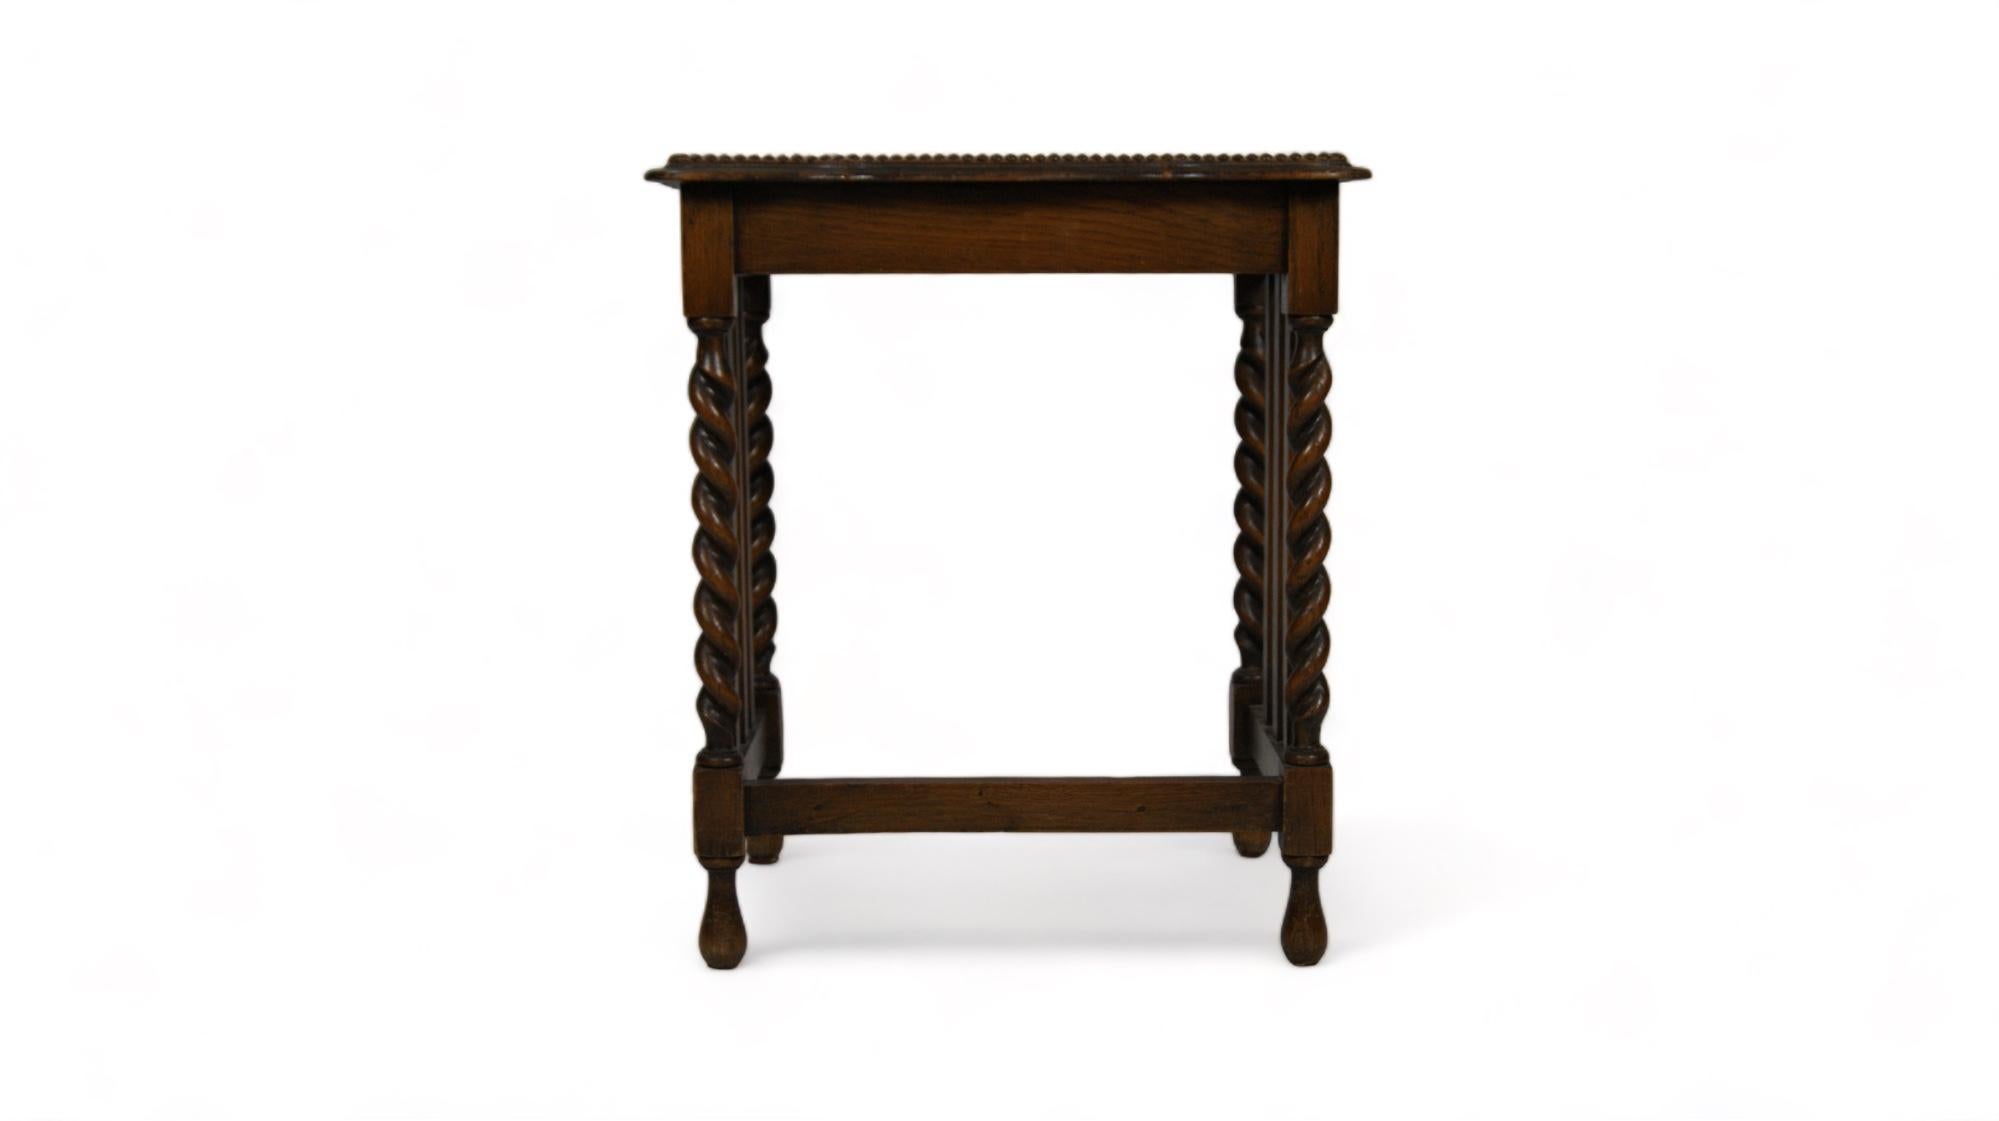 The vintage side table with twisted legs, dating from the 1920s, is an exquisite treasure that evokes the essence of a bygone era of elegance and refinement. This unique piece of furniture merging functionality with style.

The body of the coffee